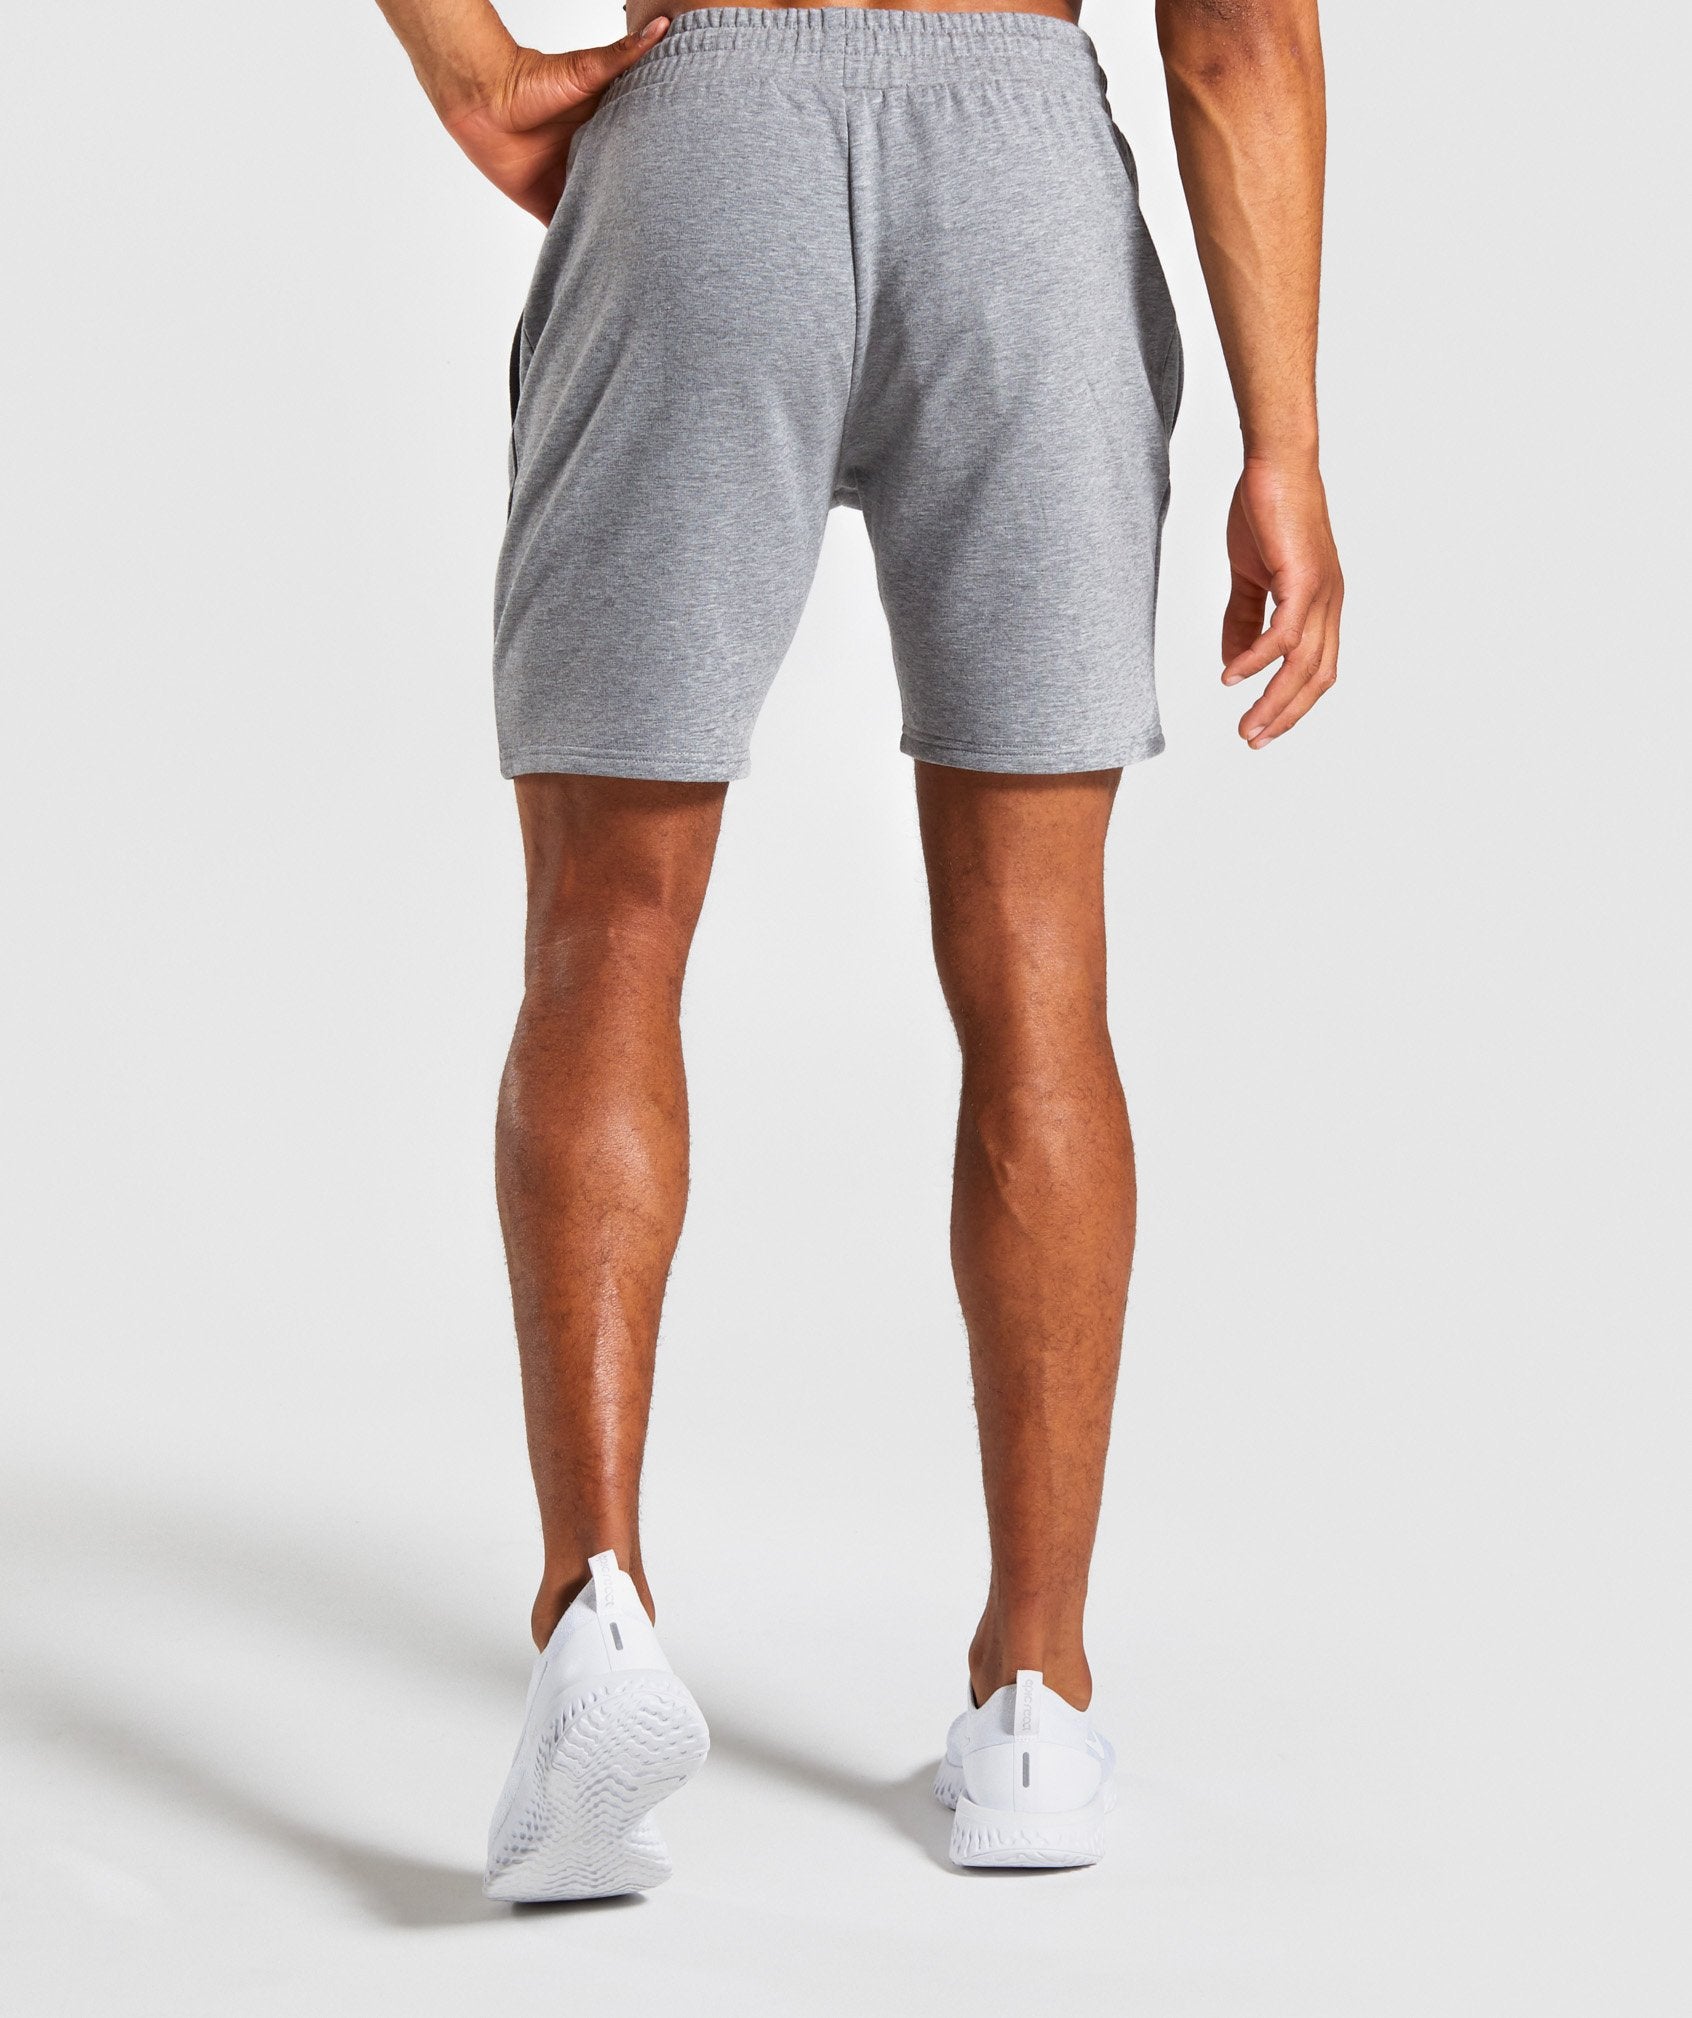 Contrast Shorts in Grey - view 2